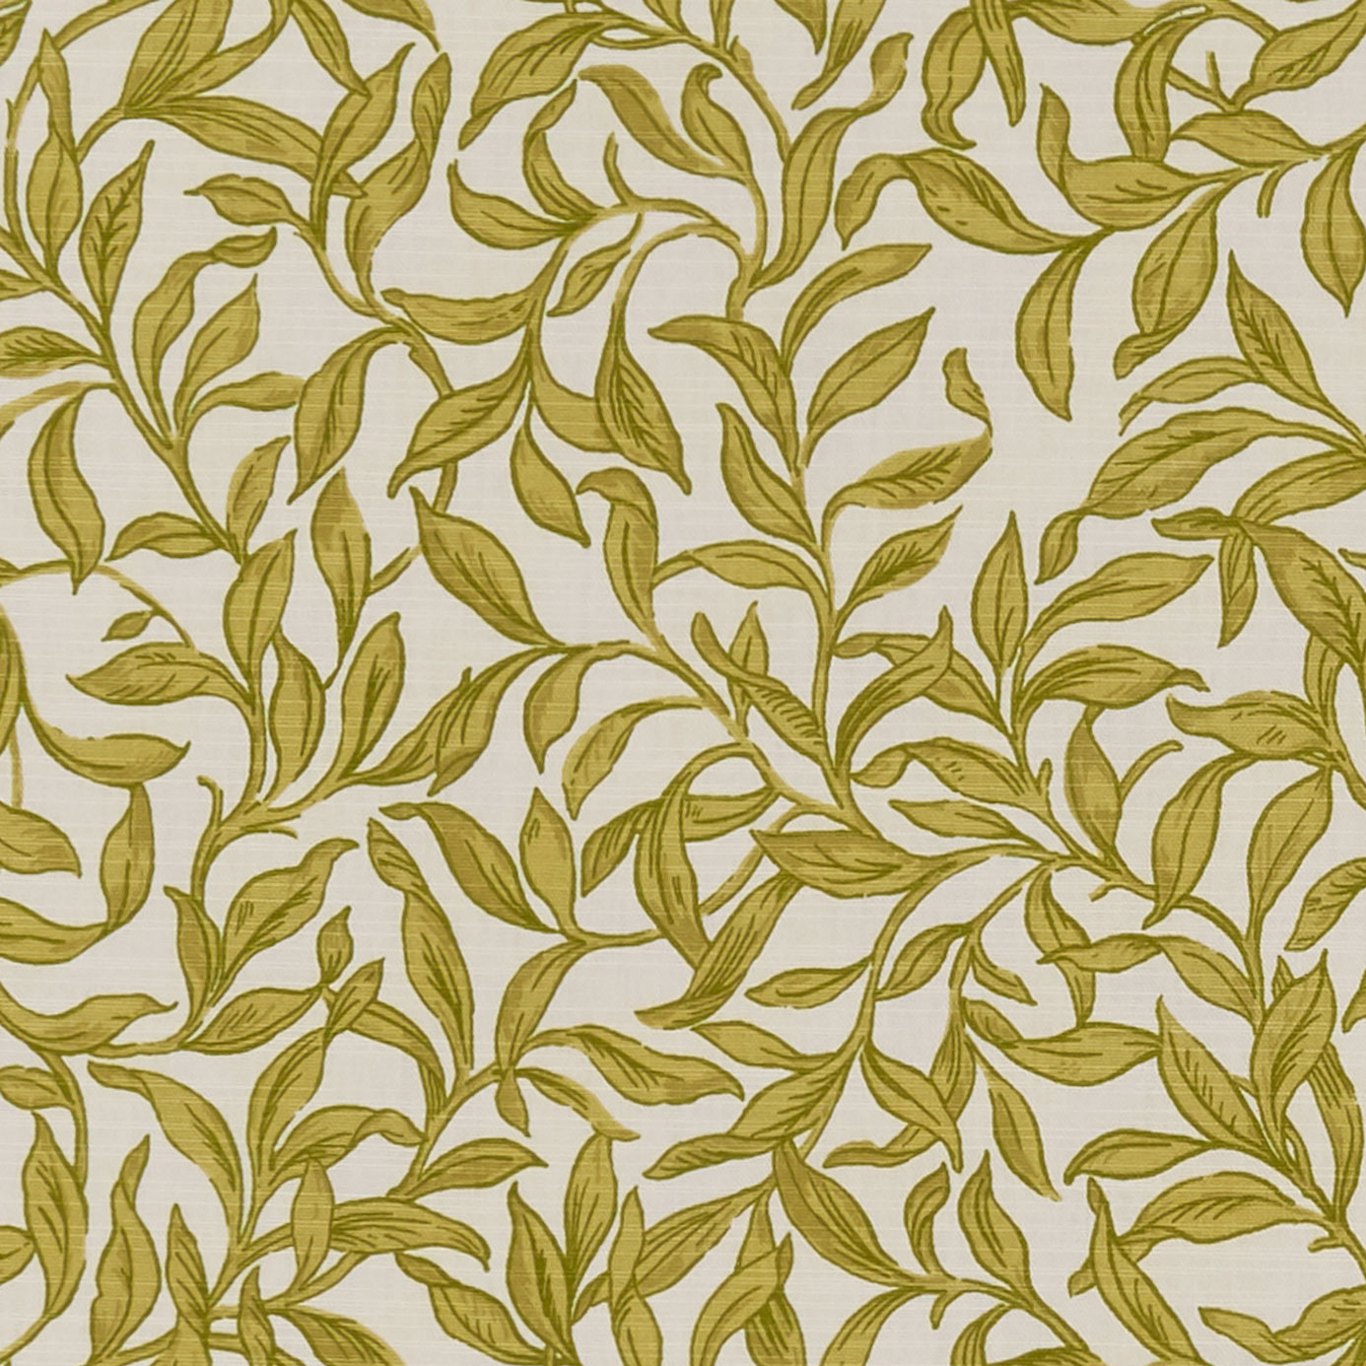 Entwistle Chartreuse Fabric by CNC